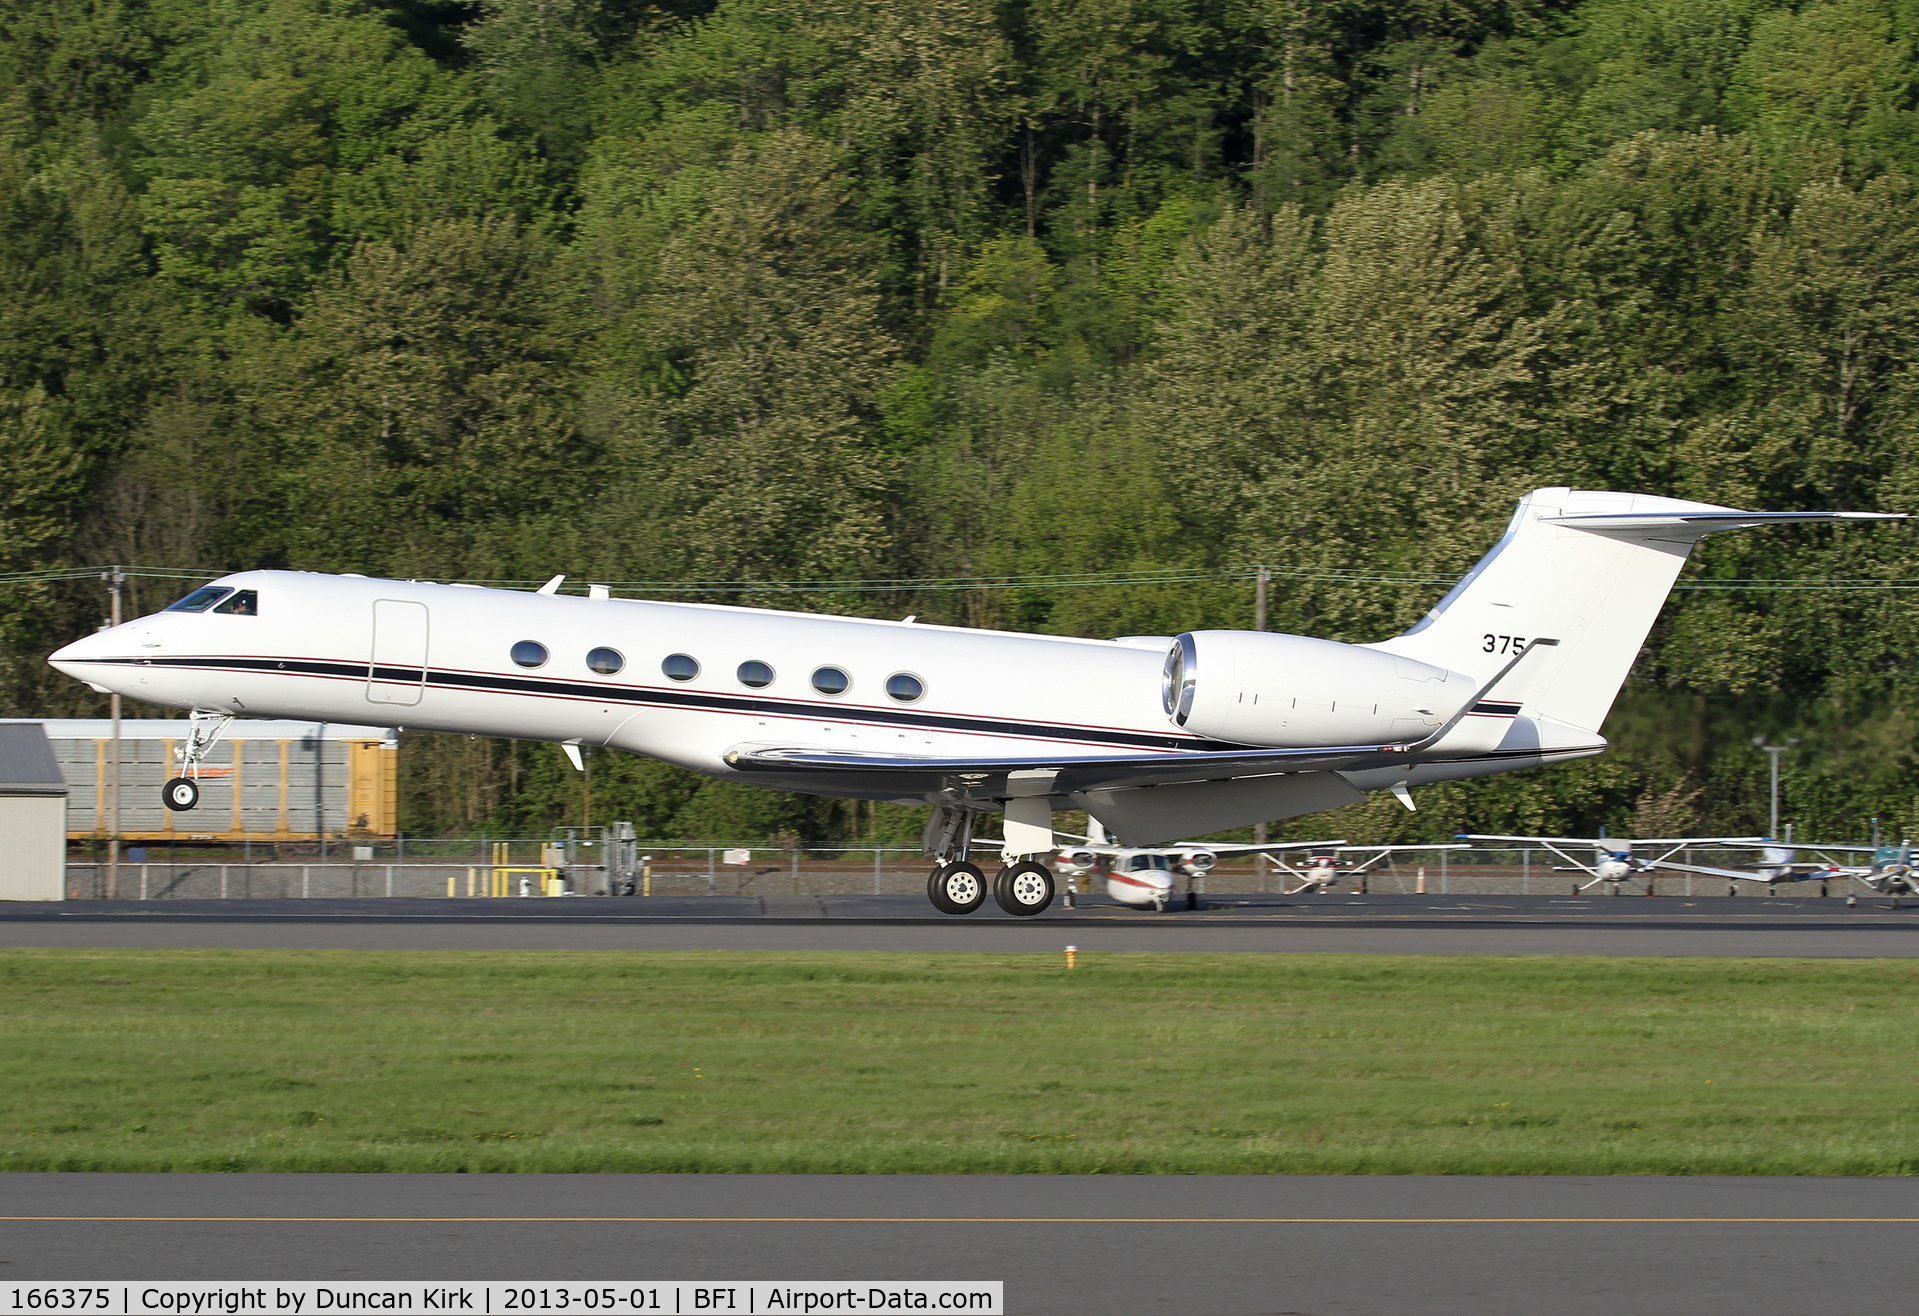 166375, Gulfstream Aerospace C-37A (Gulfstream V) C/N 657, Late afternoon landing shot. Pity about the lousy scheme!